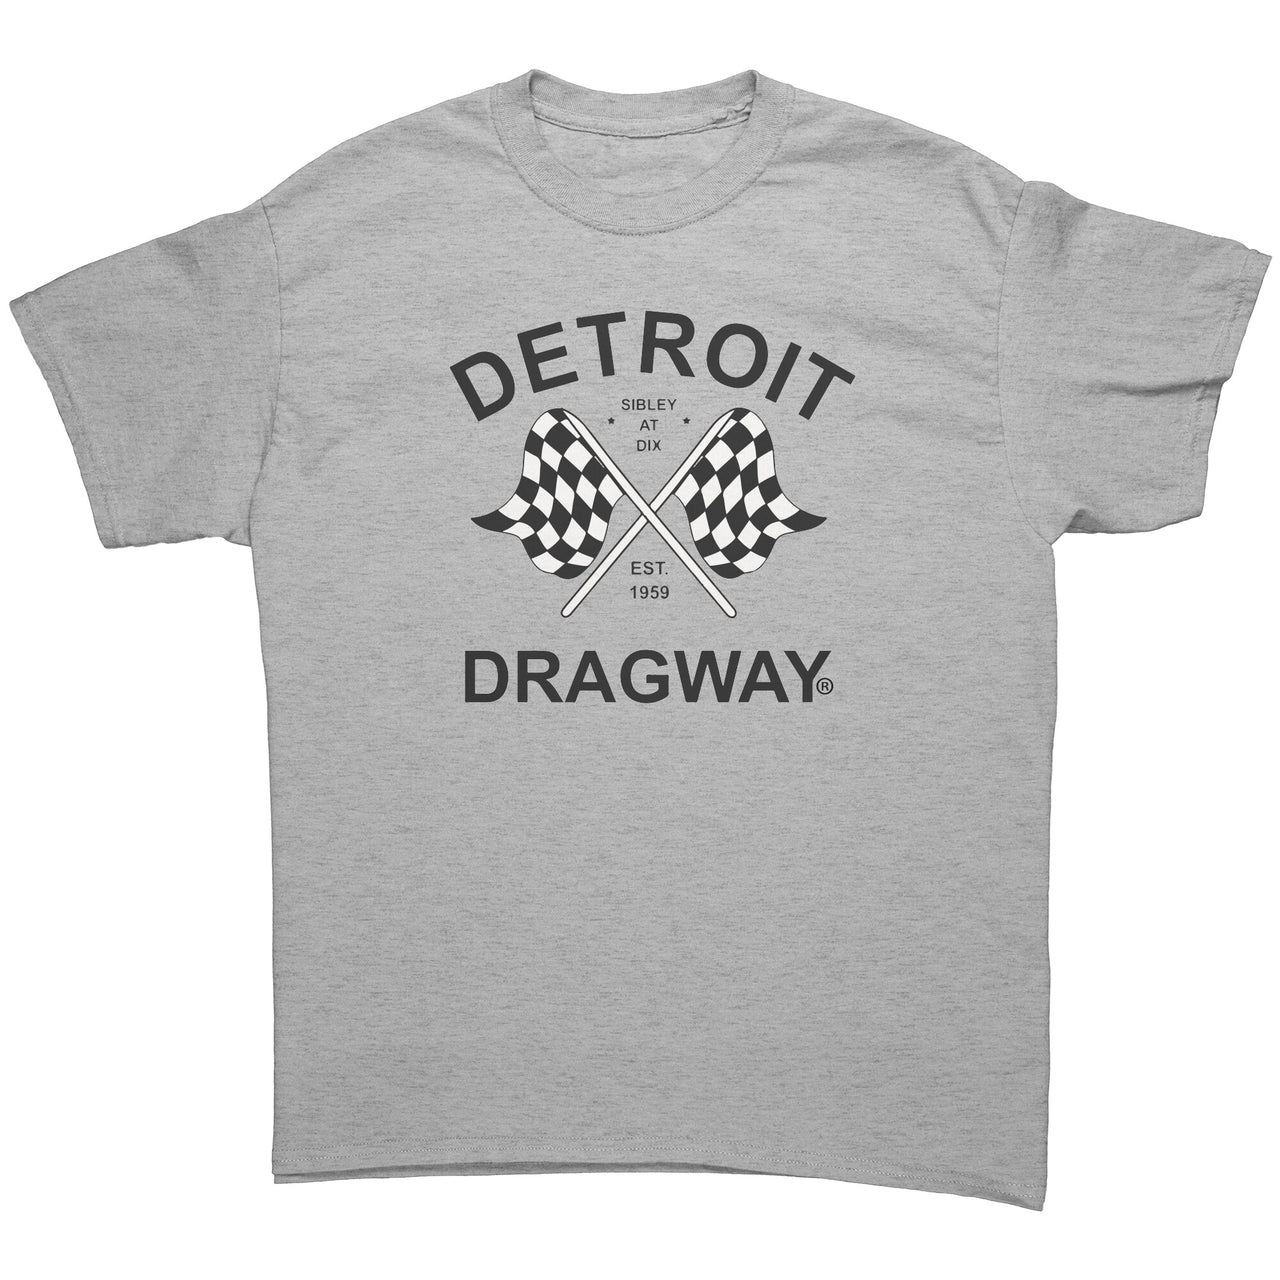 *Detroit Dragway® Checkered Flags Short Sleeve T-Shirt. Image On Front